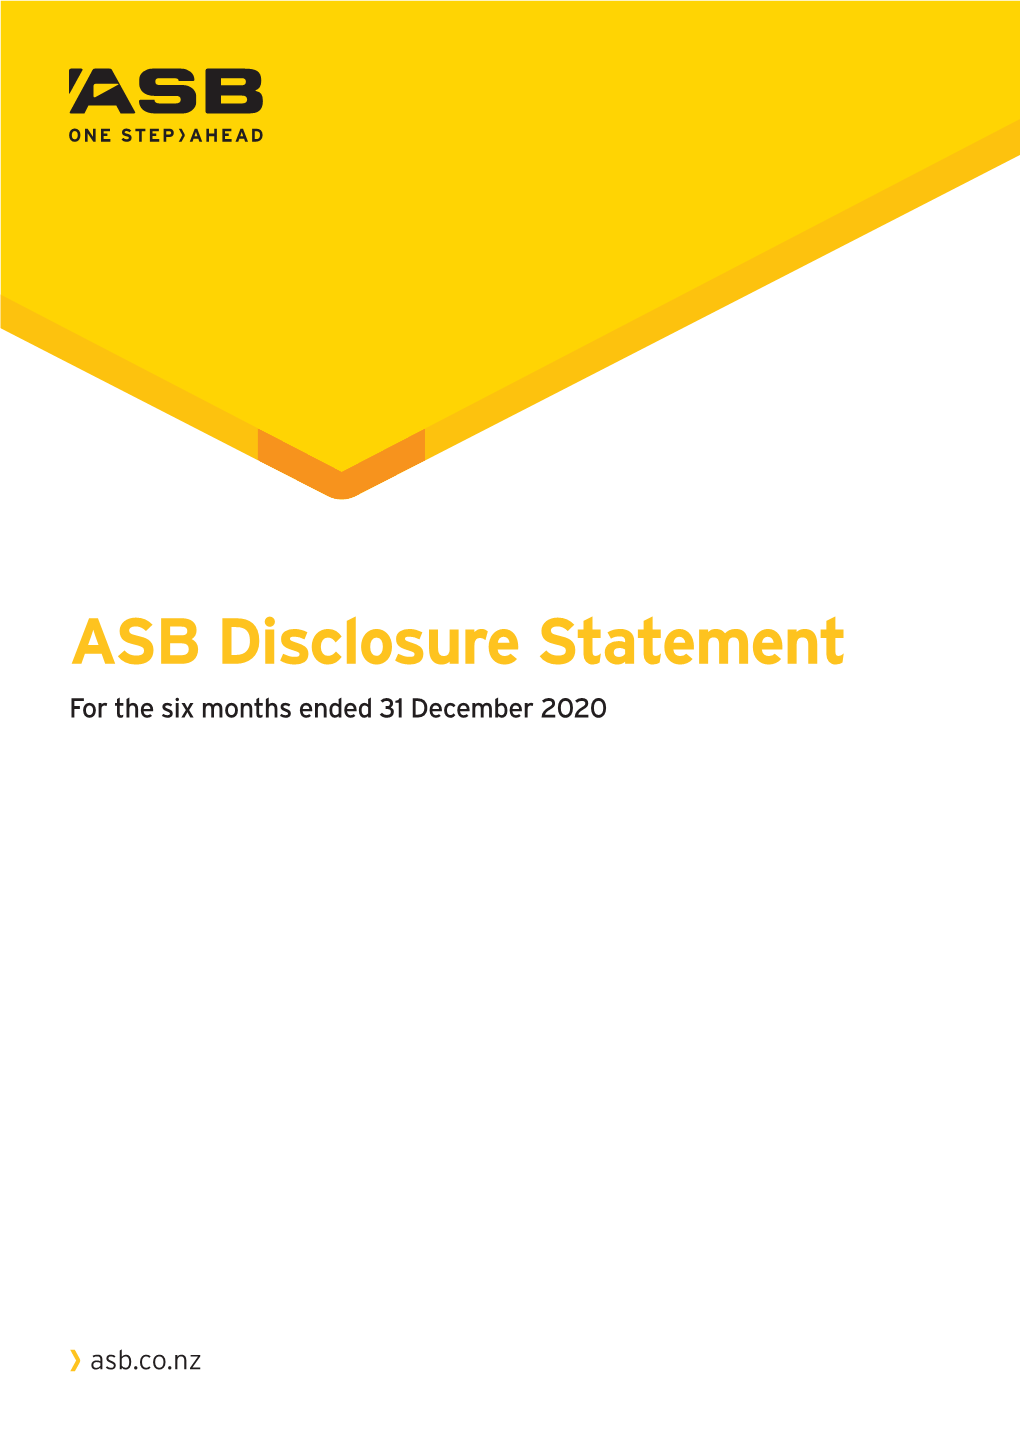 ASB Disclosure Statement for the Period Ended 31 December 2020